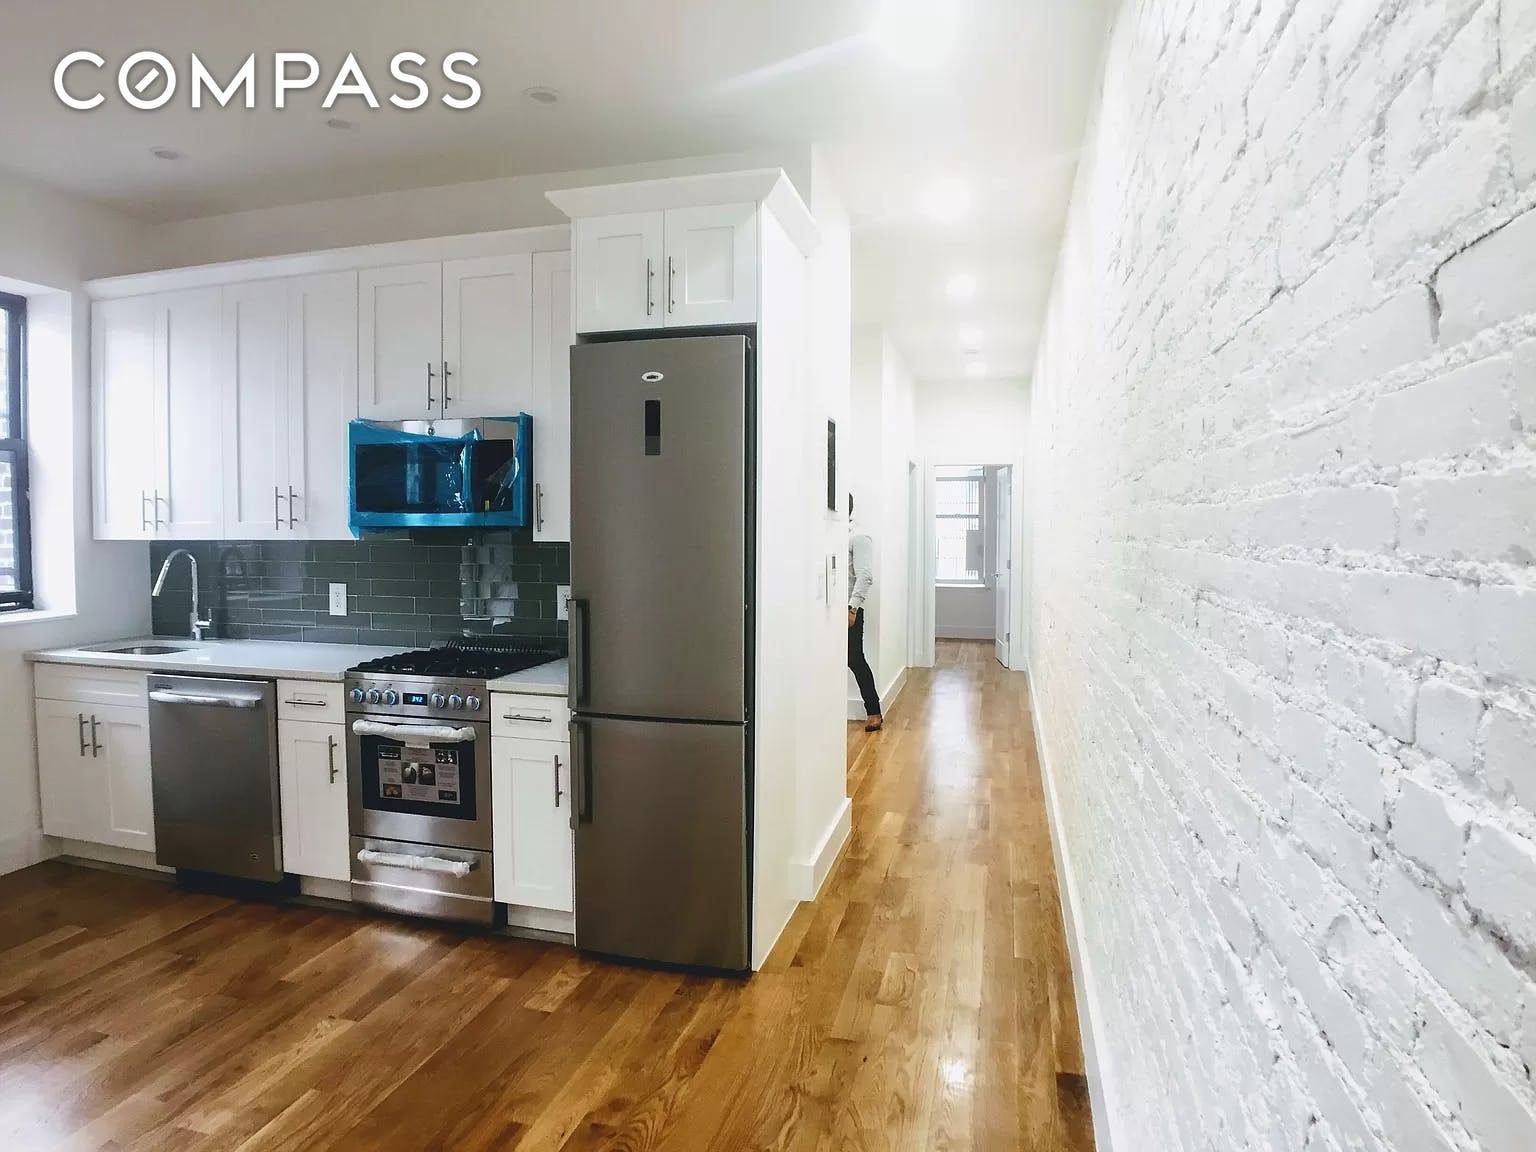 Be one of the first to live in this SPARKLING Brand NEW 3 Bed 2 Bath home complete with Washer Dryer in unit, in Prime Central Harlem location Right off ...